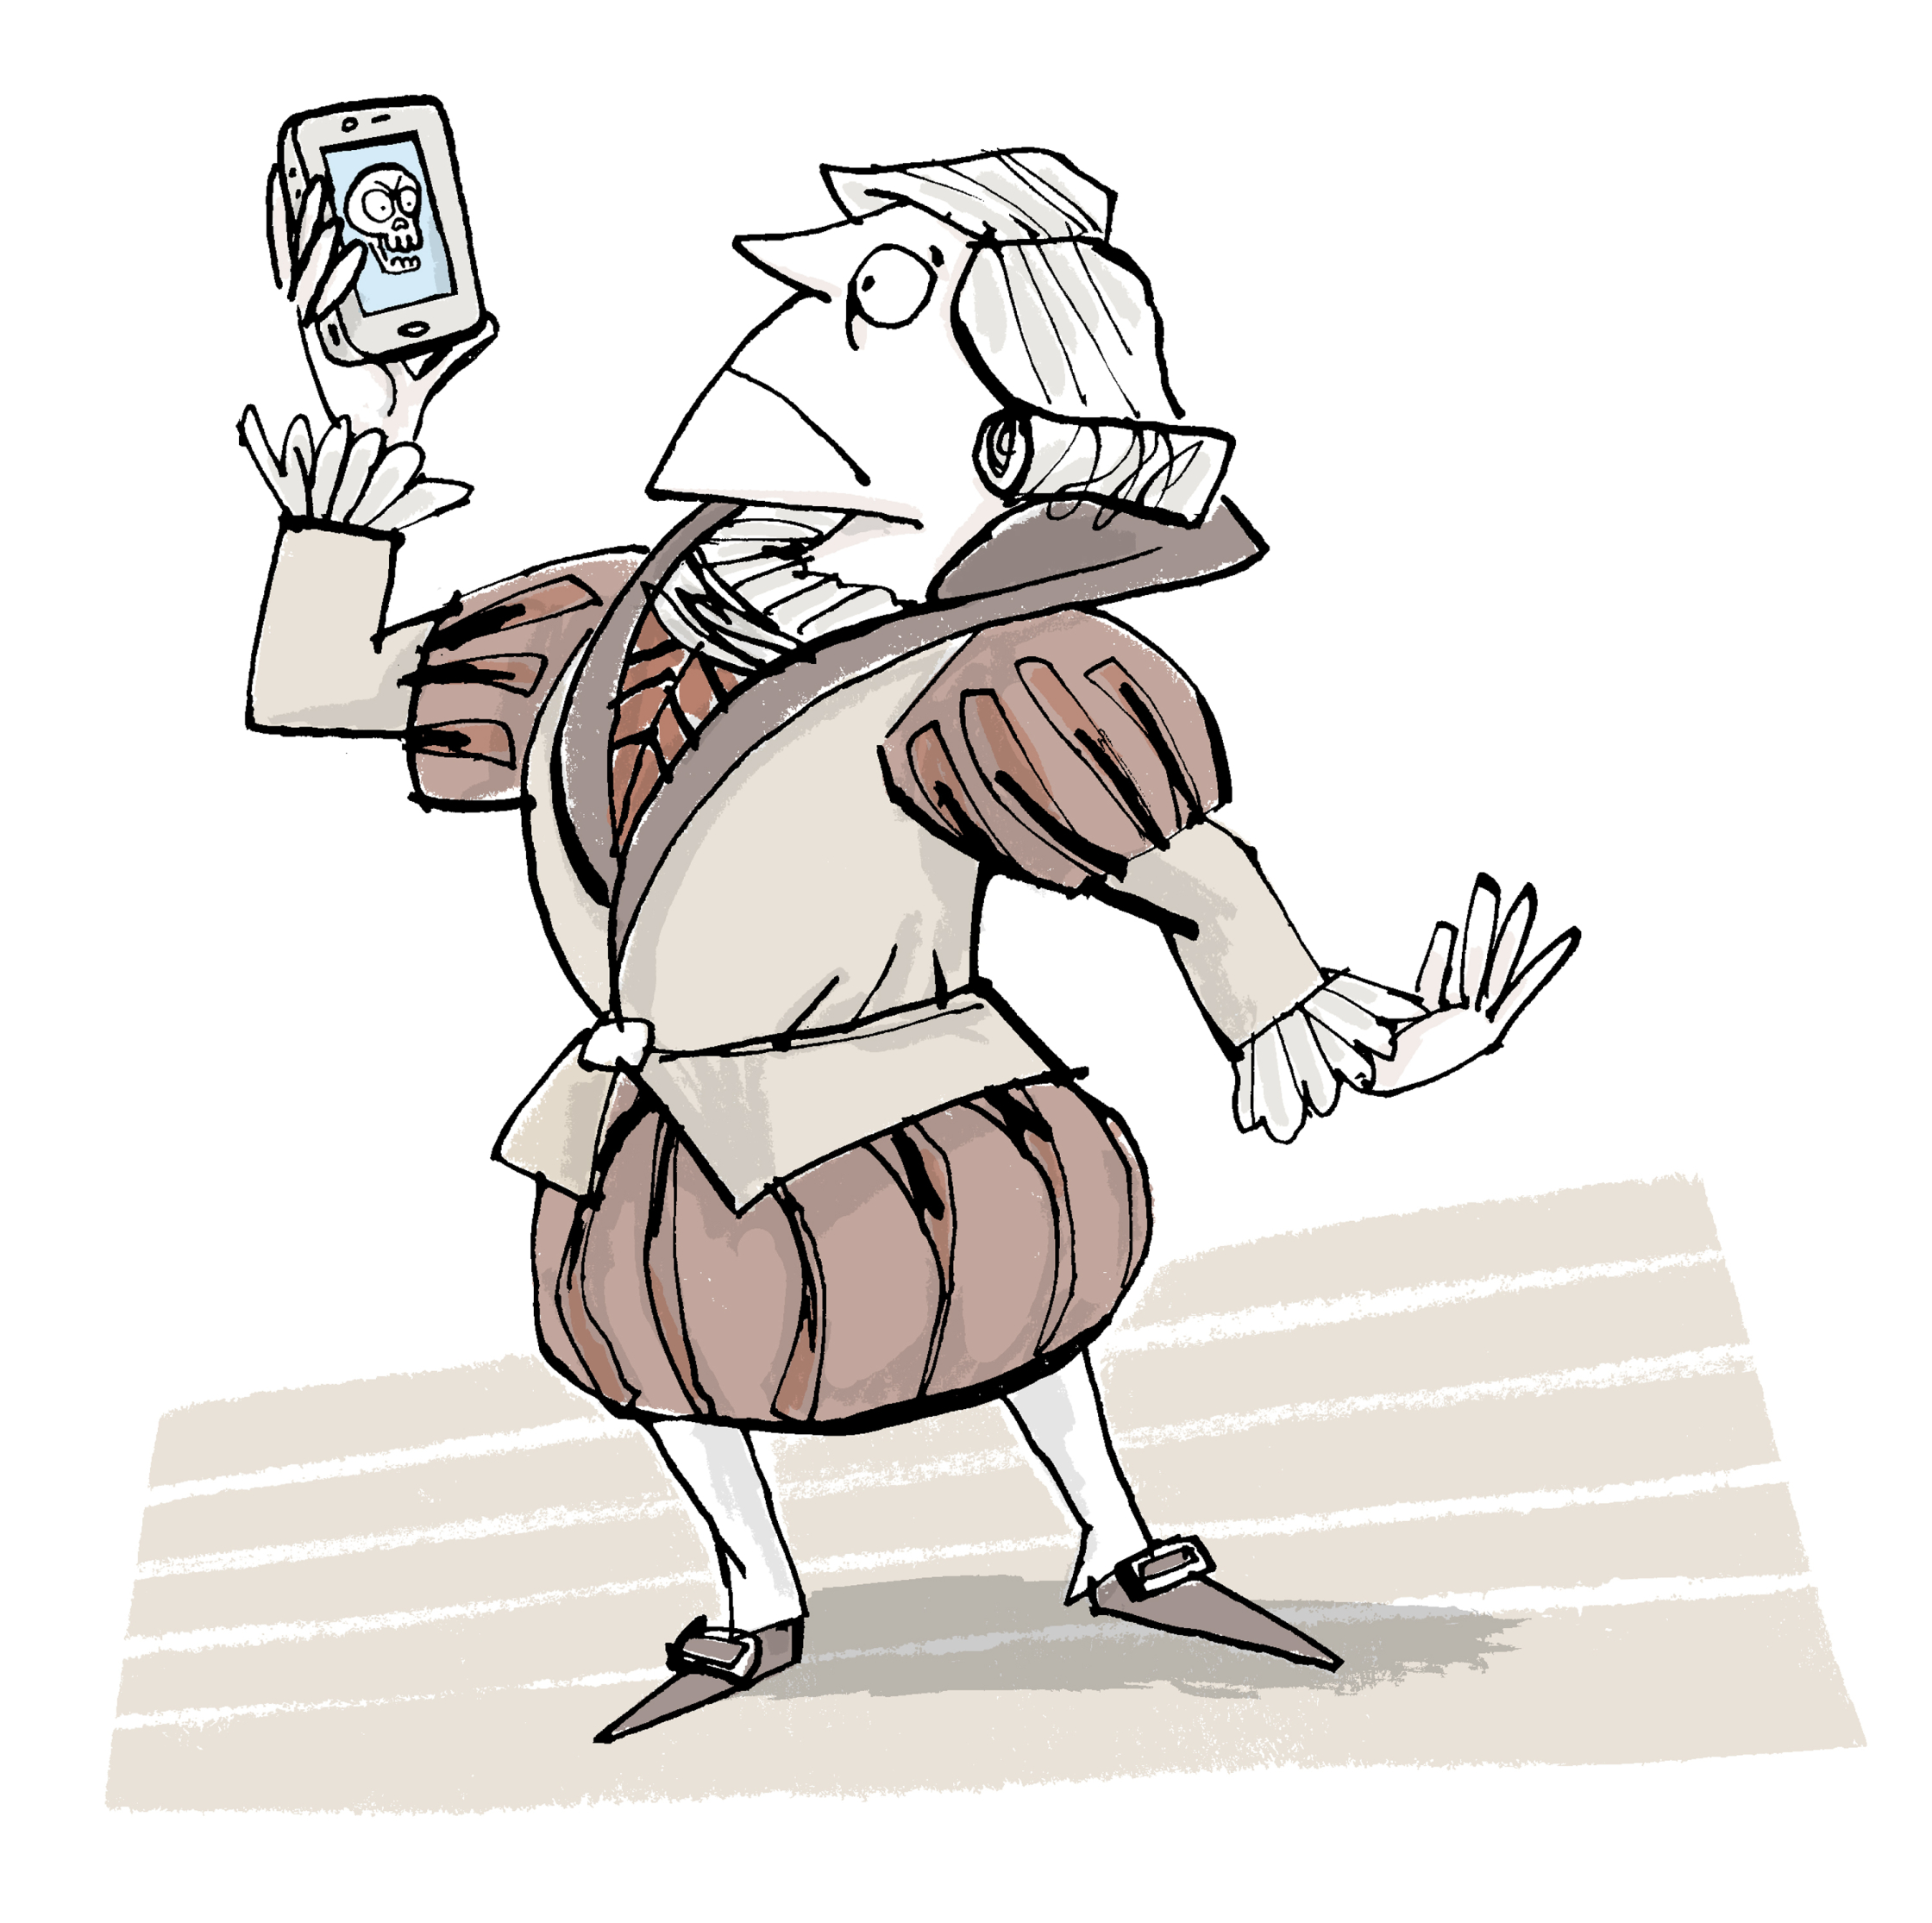 Shakespeare on the Phone